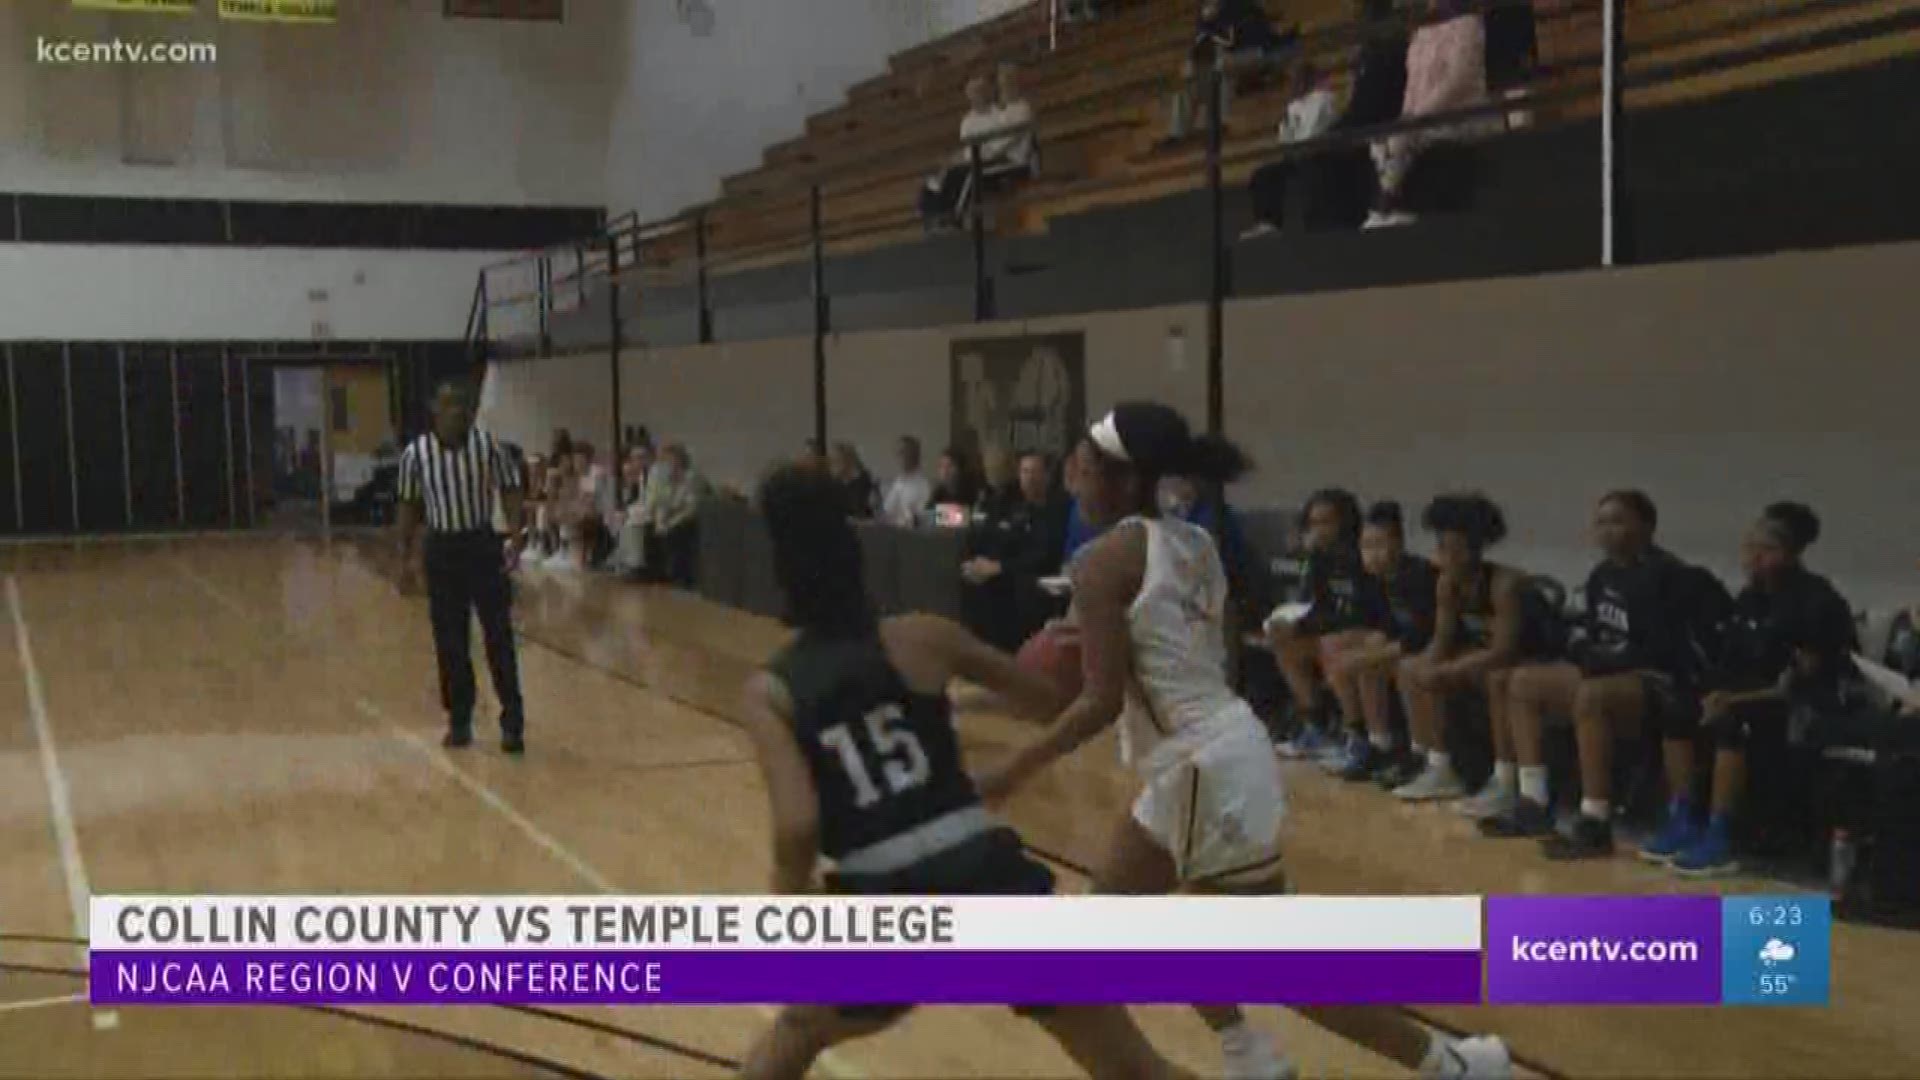 Temple College looked to snap a 2-game losing streak as they squared off against Collin County.